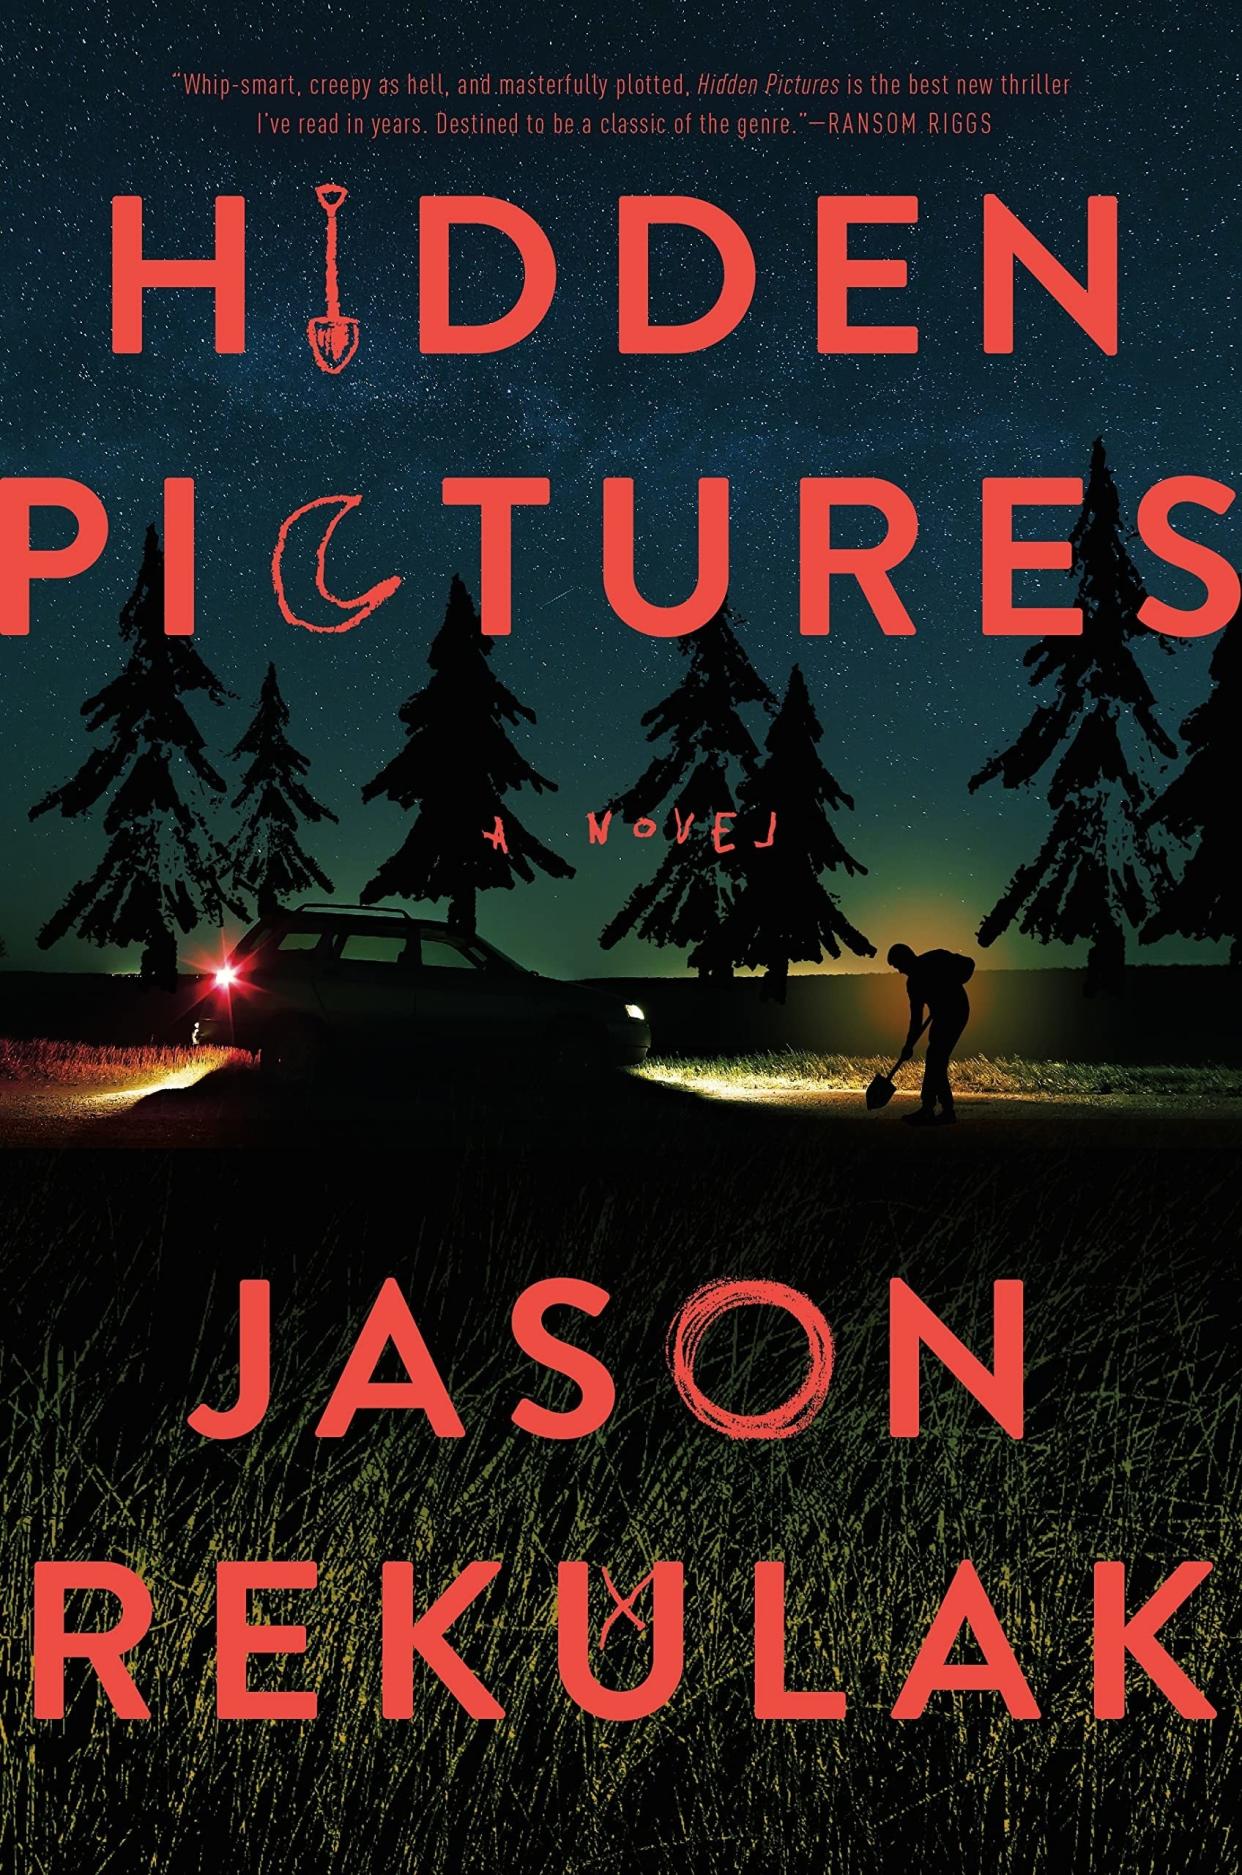 Book cover of "hidden pictures"